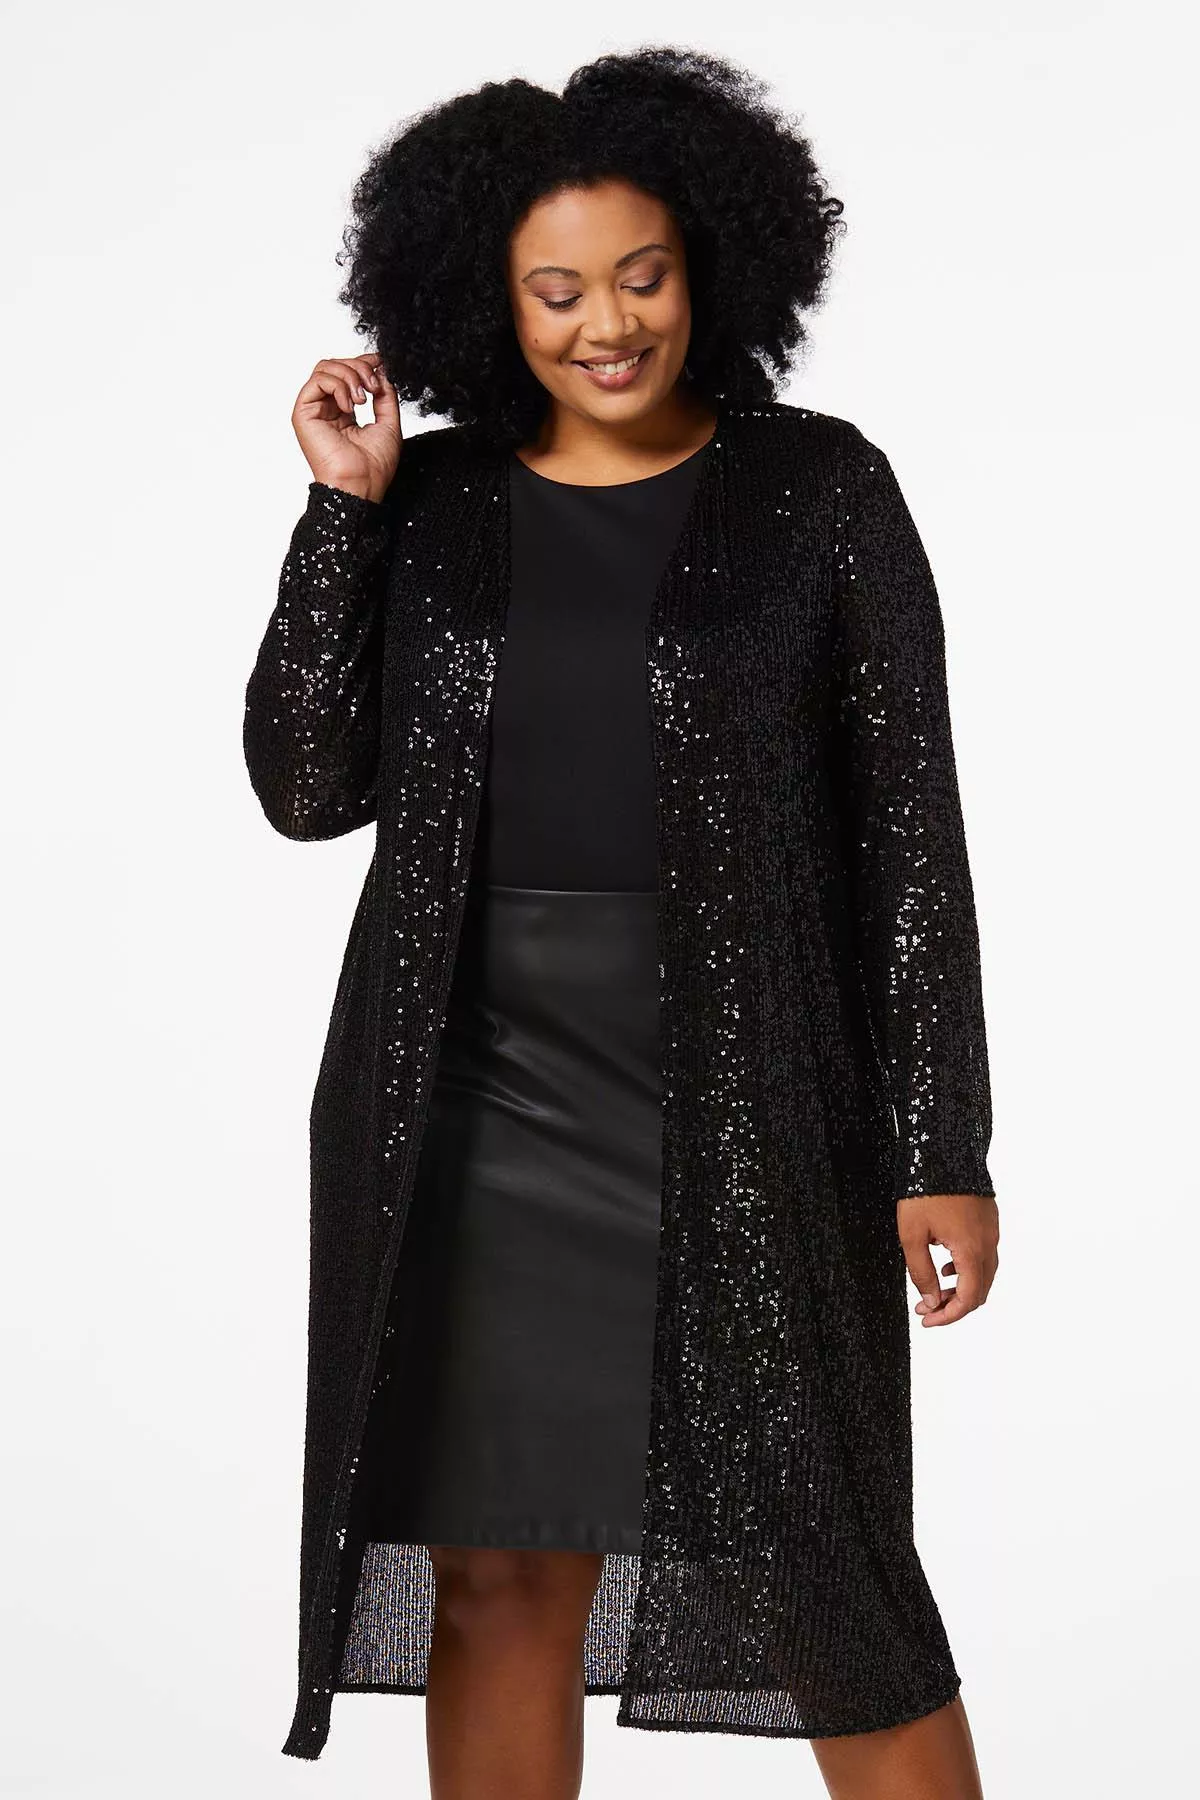 Cato Fashions  Cato Plus Size Ribbed Duster Cardigan